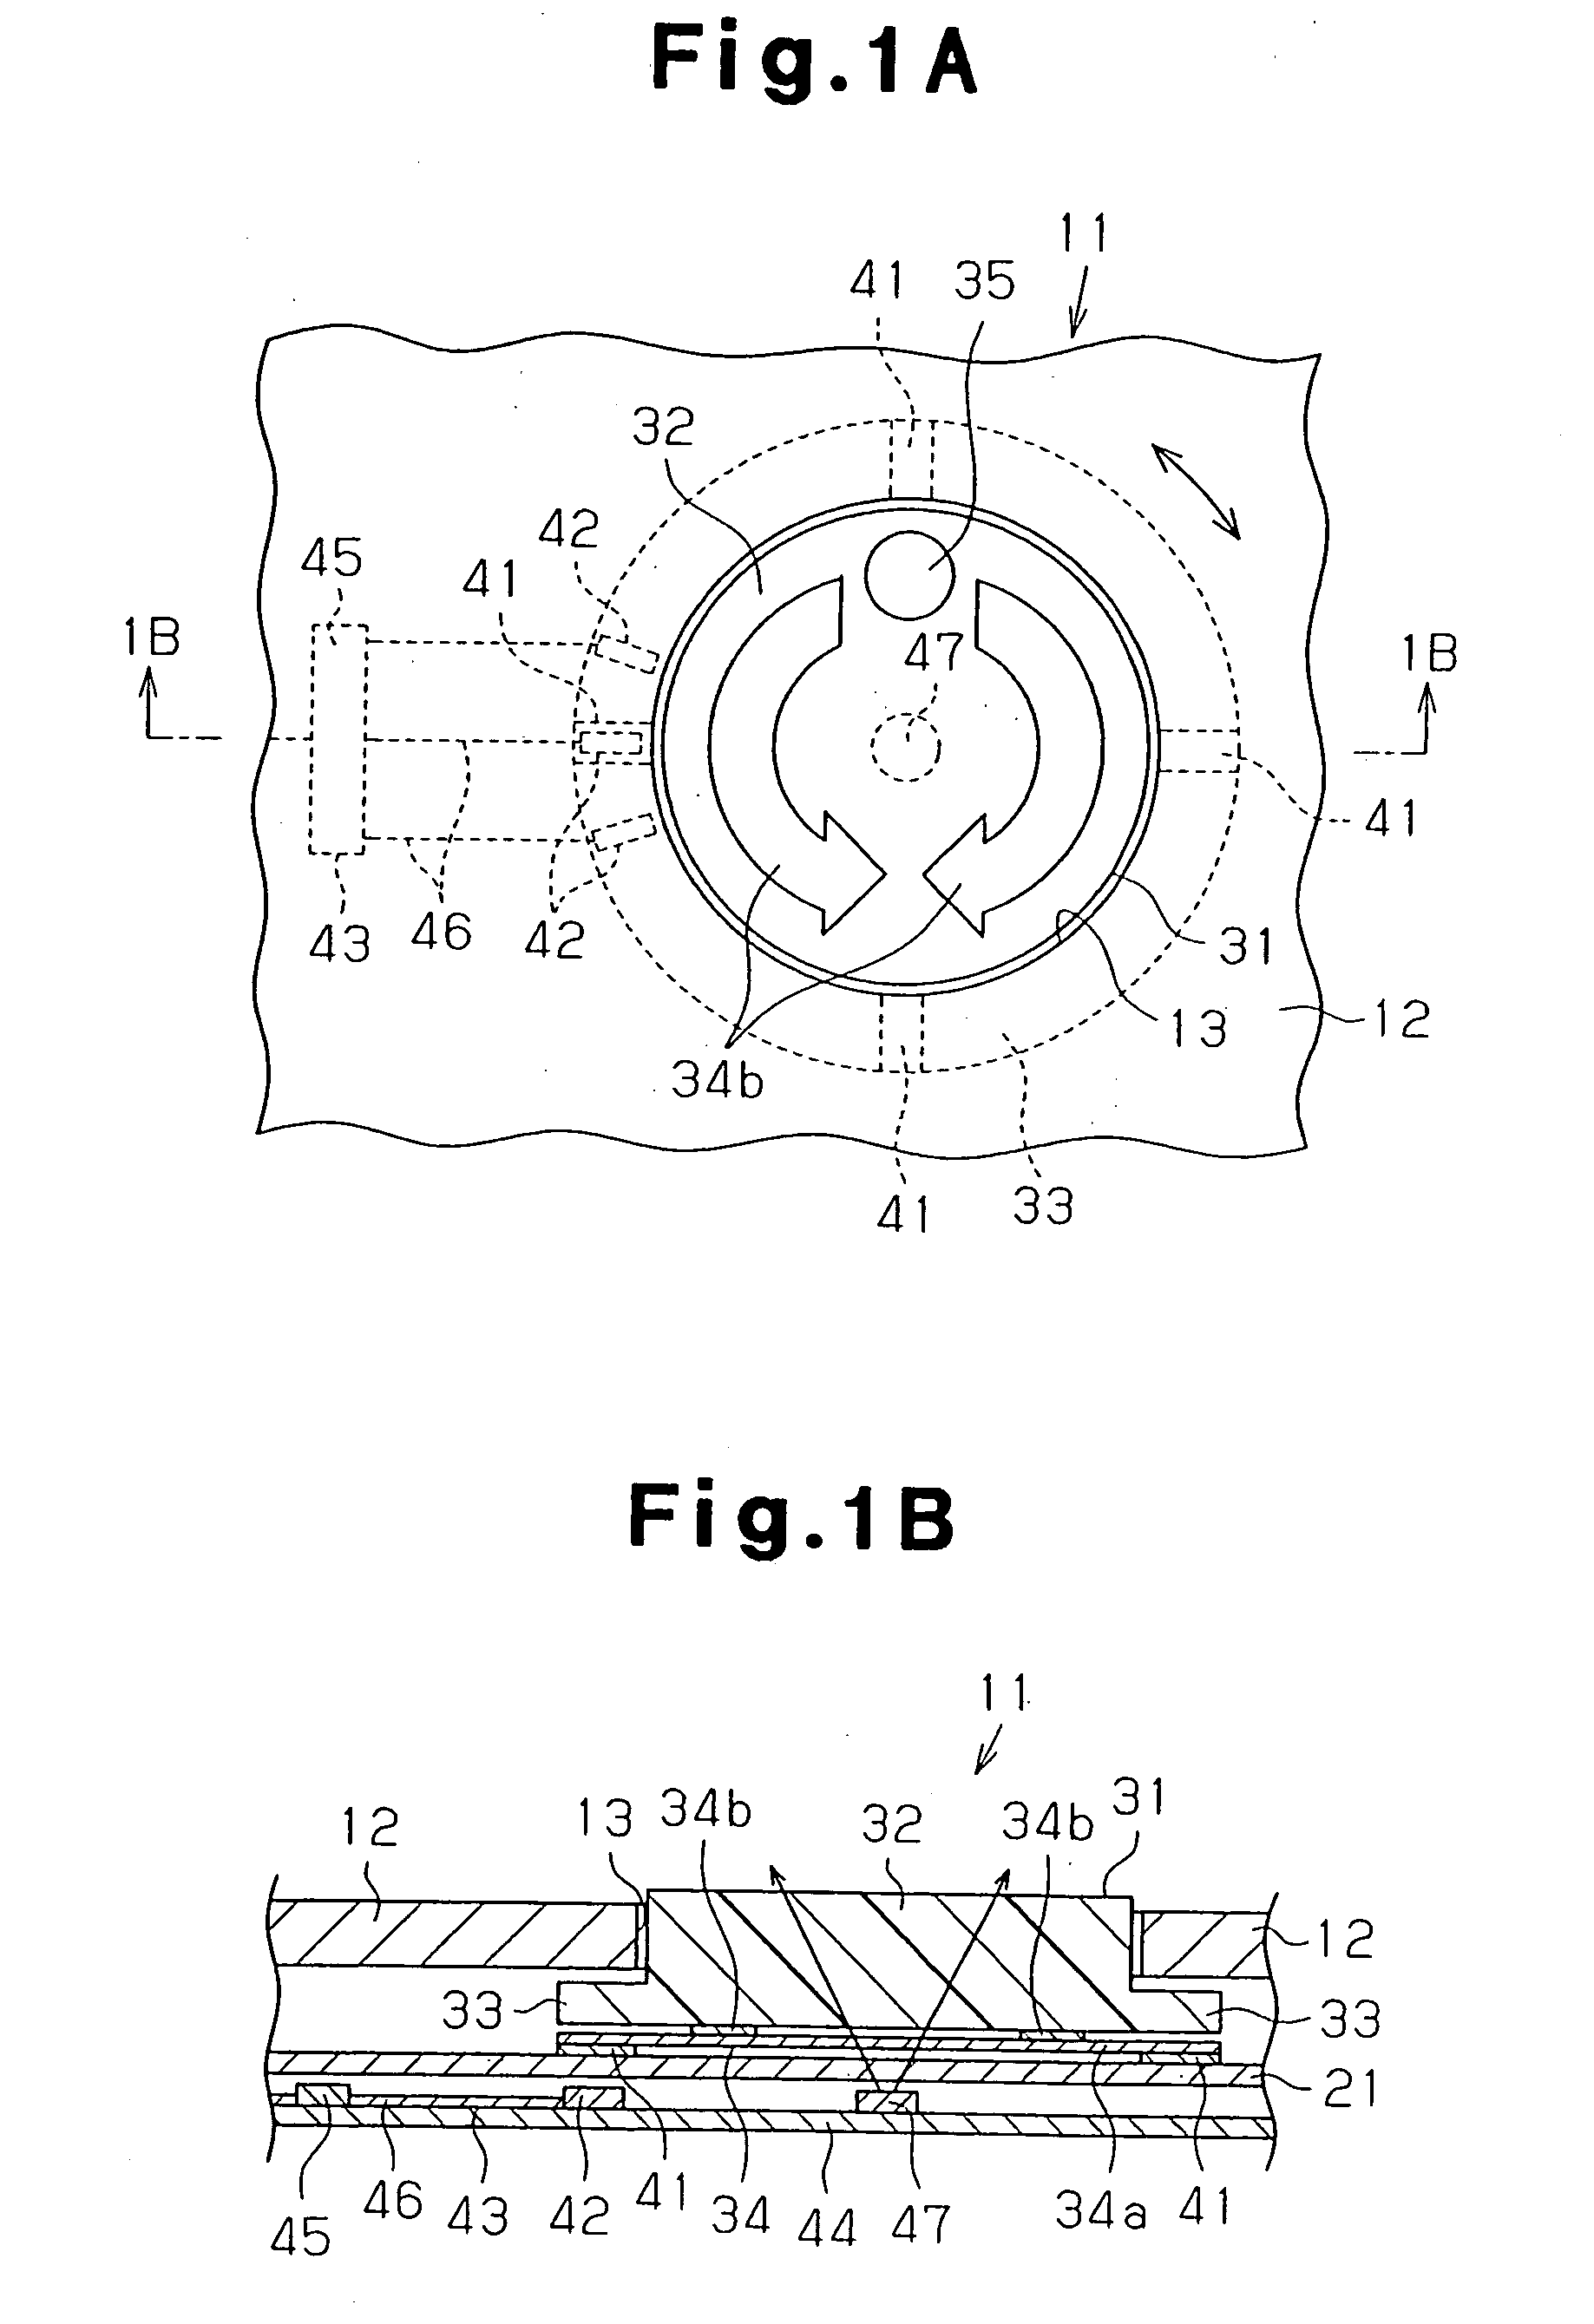 Key switch and electronic device